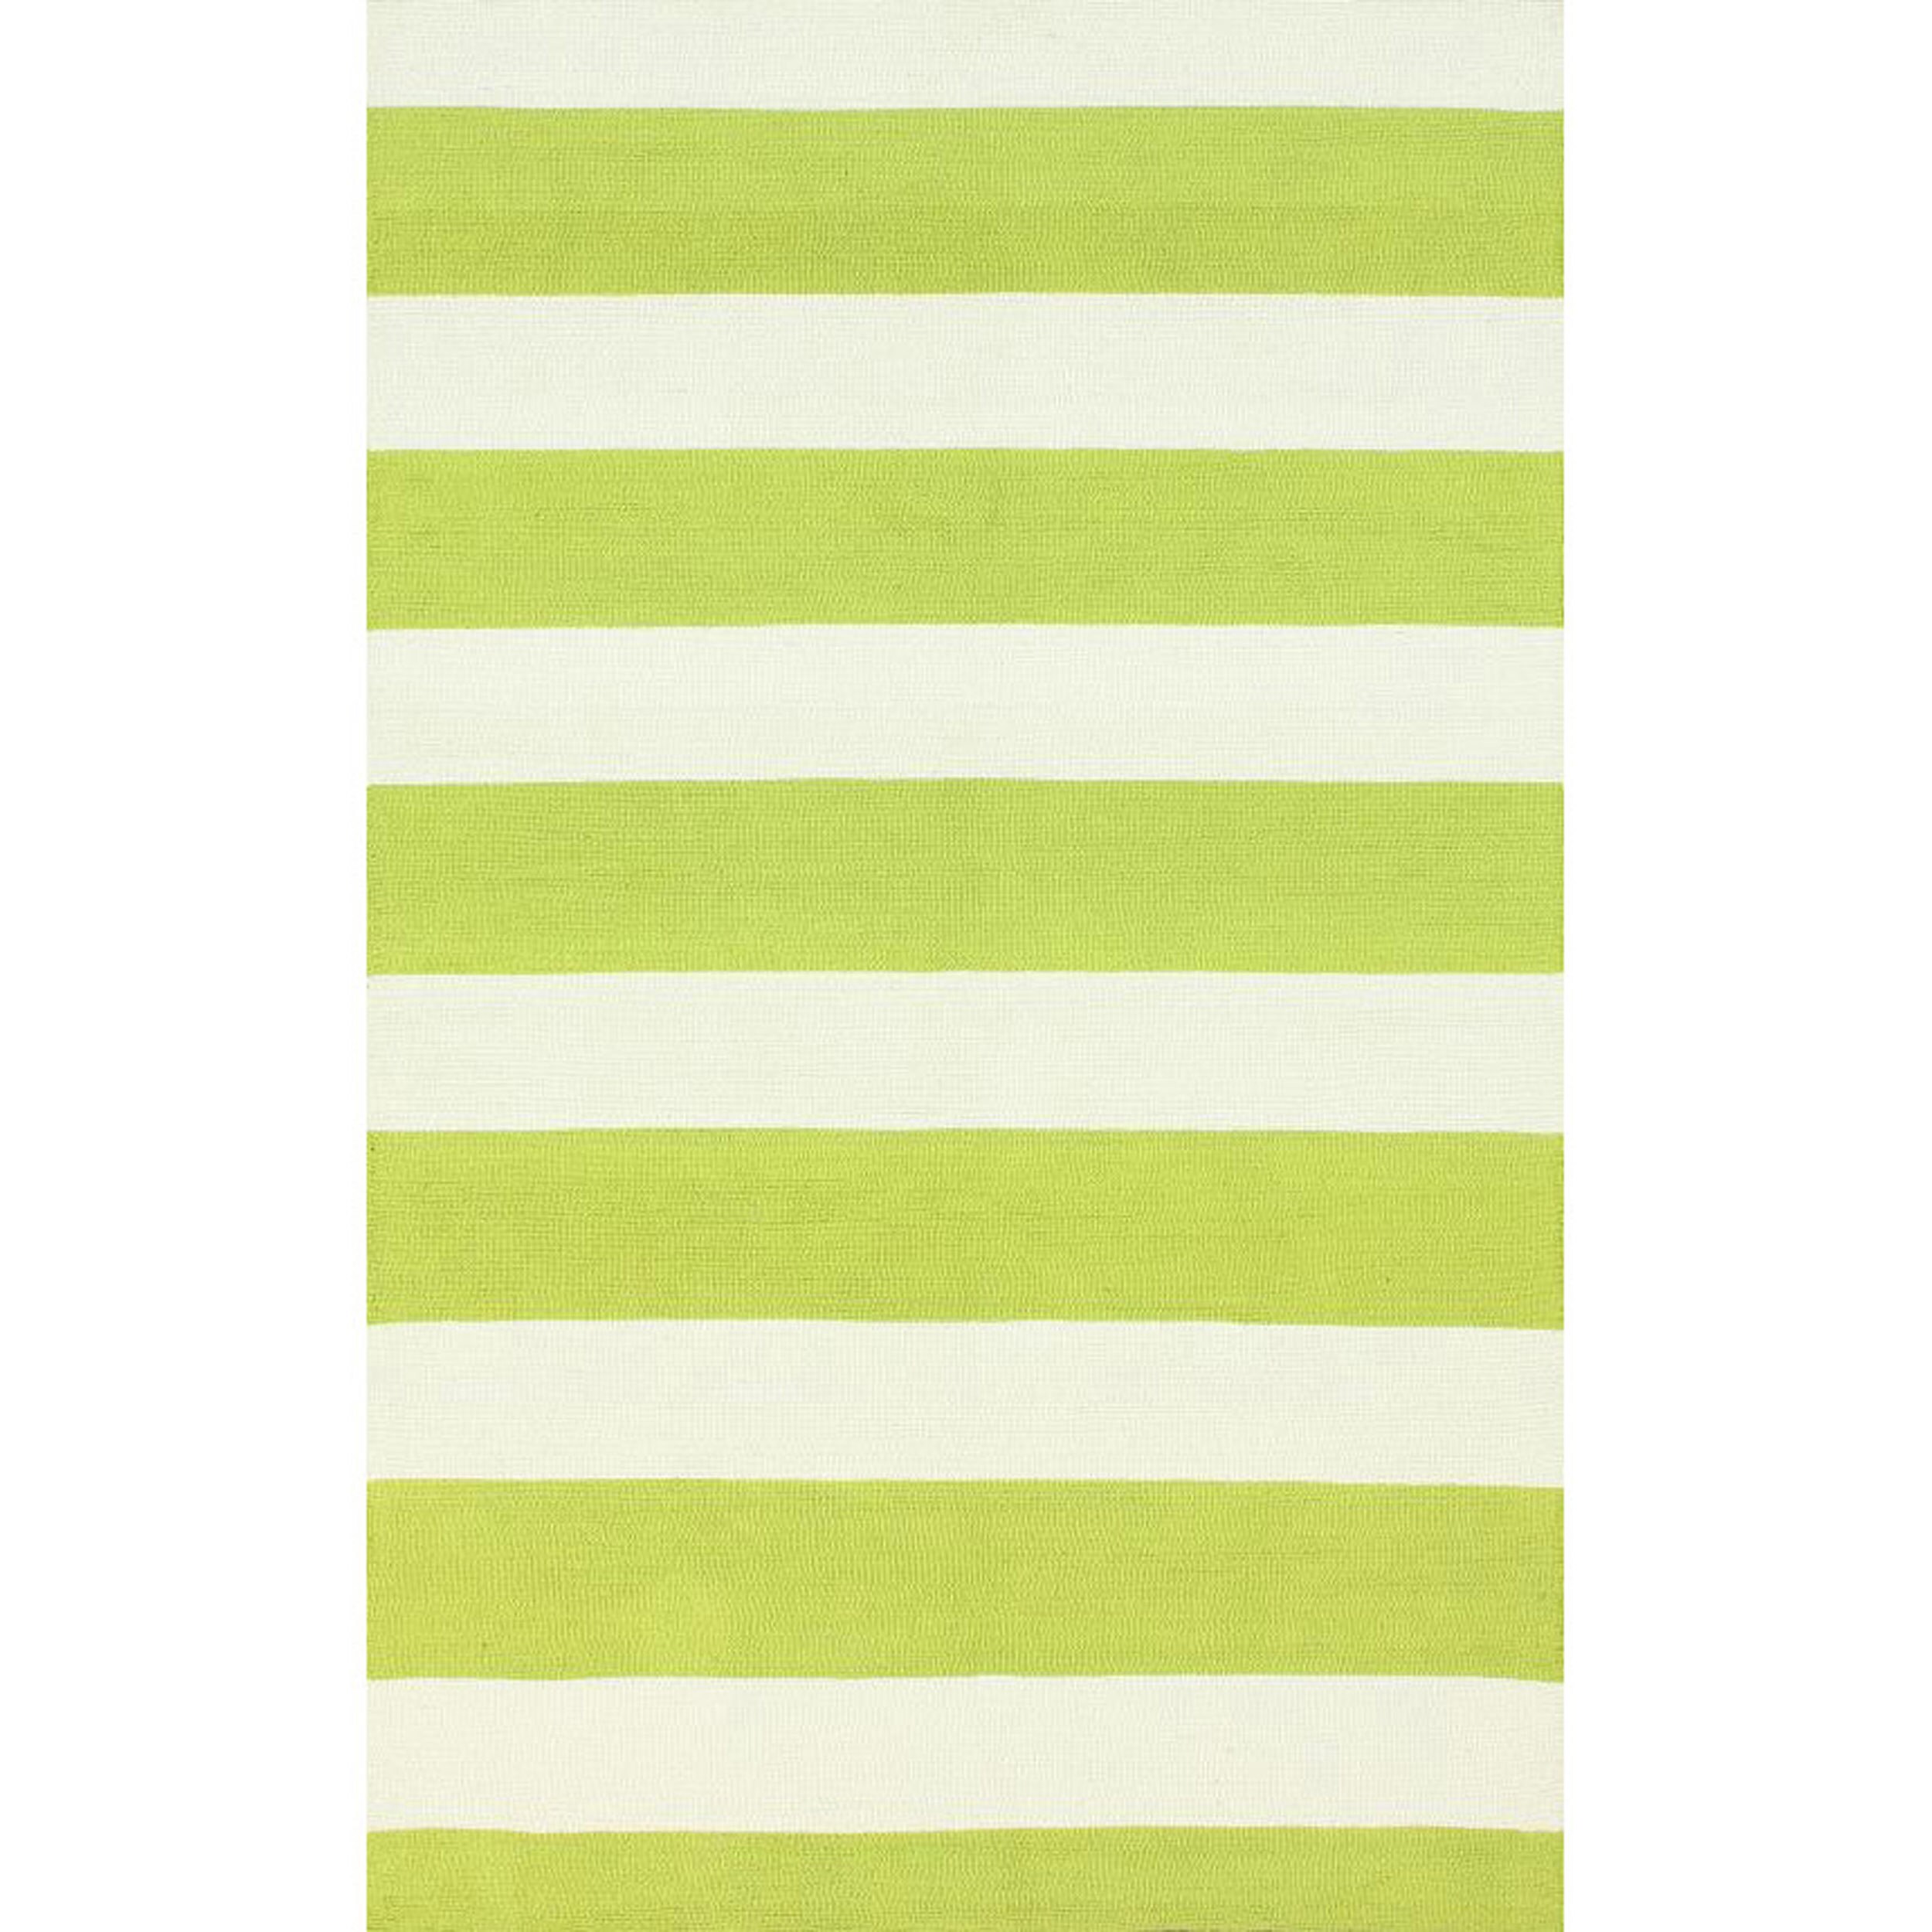 Nuloom Handmade Modern Stripes Green Wool Rug (5 X 8) (IvoryPattern StripeTip We recommend the use of a non skid pad to keep the rug in place on smooth surfaces.All rug sizes are approximate. Due to the difference of monitor colors, some rug colors may 